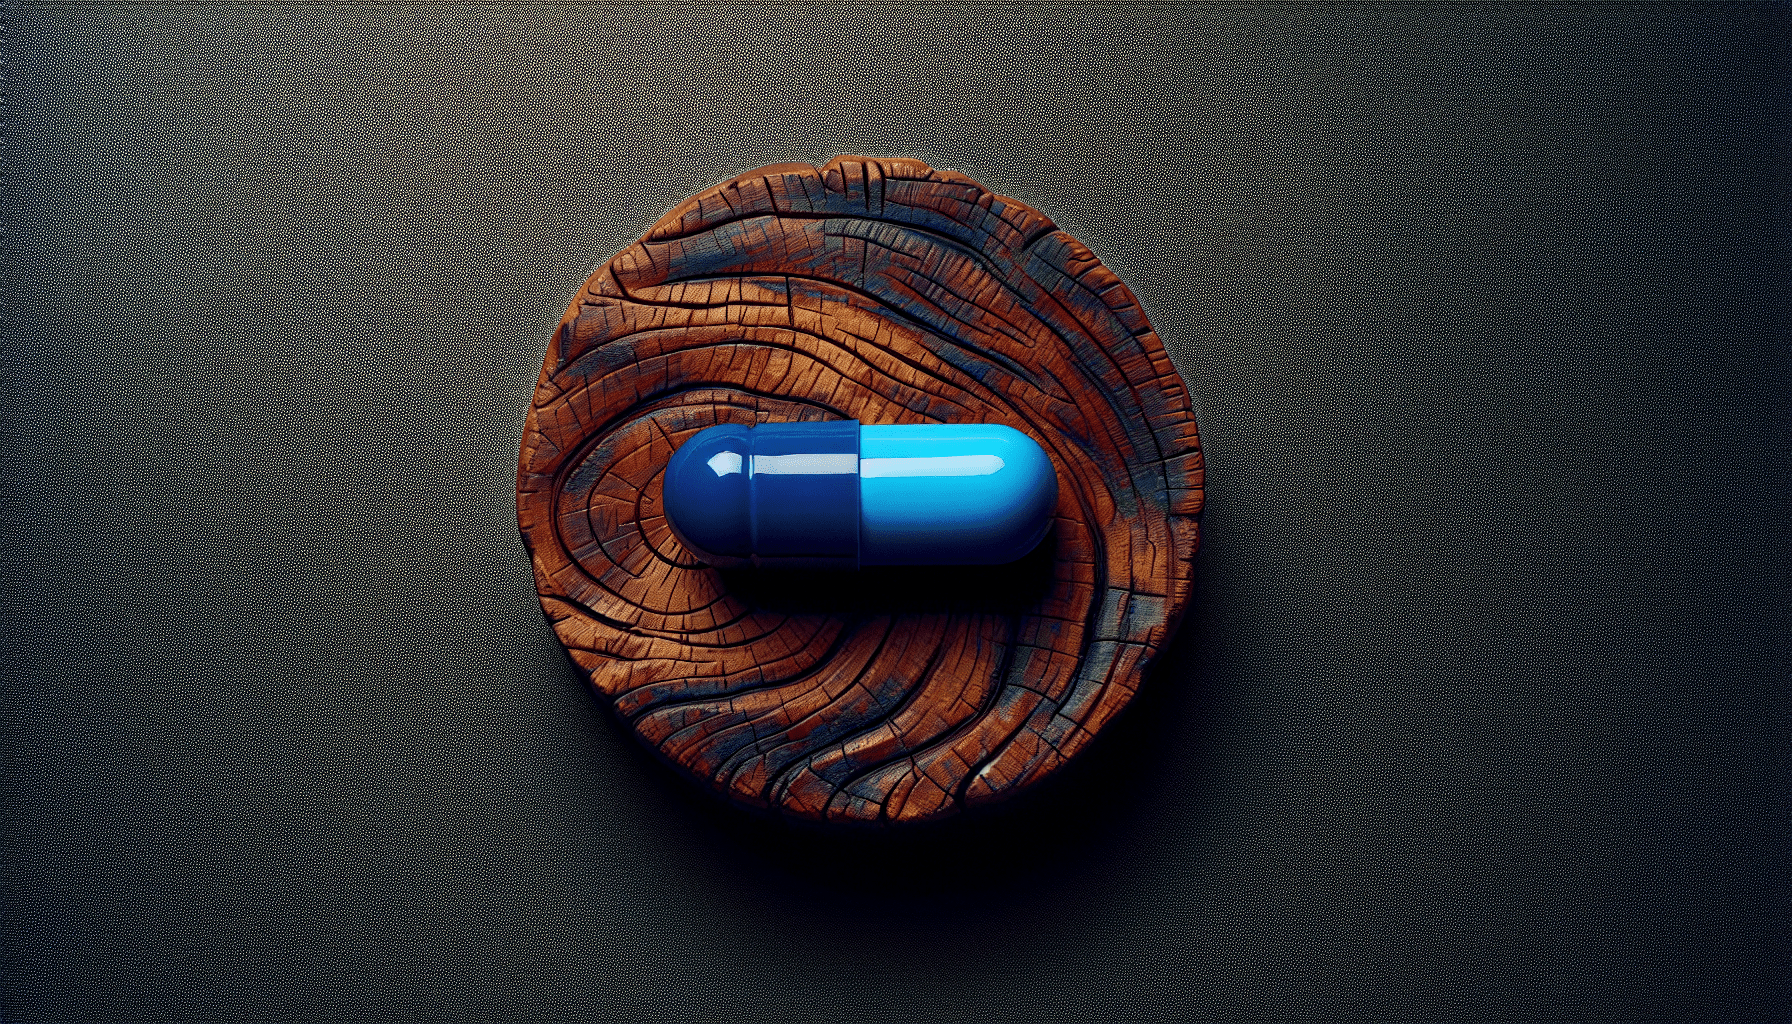 What Happens If You Take Viagra If You Don’t Need It?